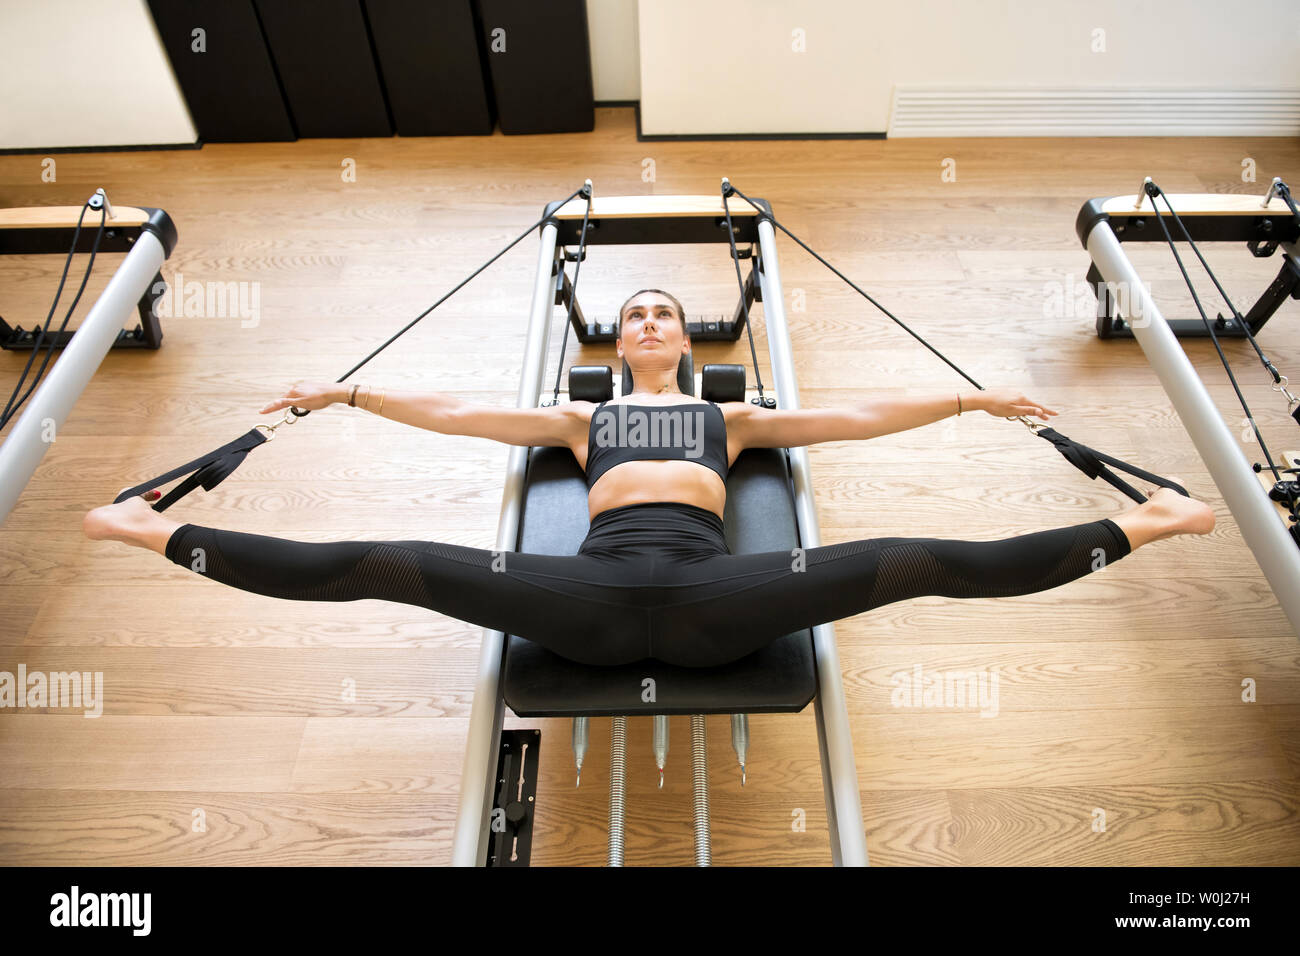 https://c8.alamy.com/comp/W0J27H/overhead-view-on-female-adult-in-black-outfit-using-pilates-reformer-machine-to-stretch-legs-W0J27H.jpg